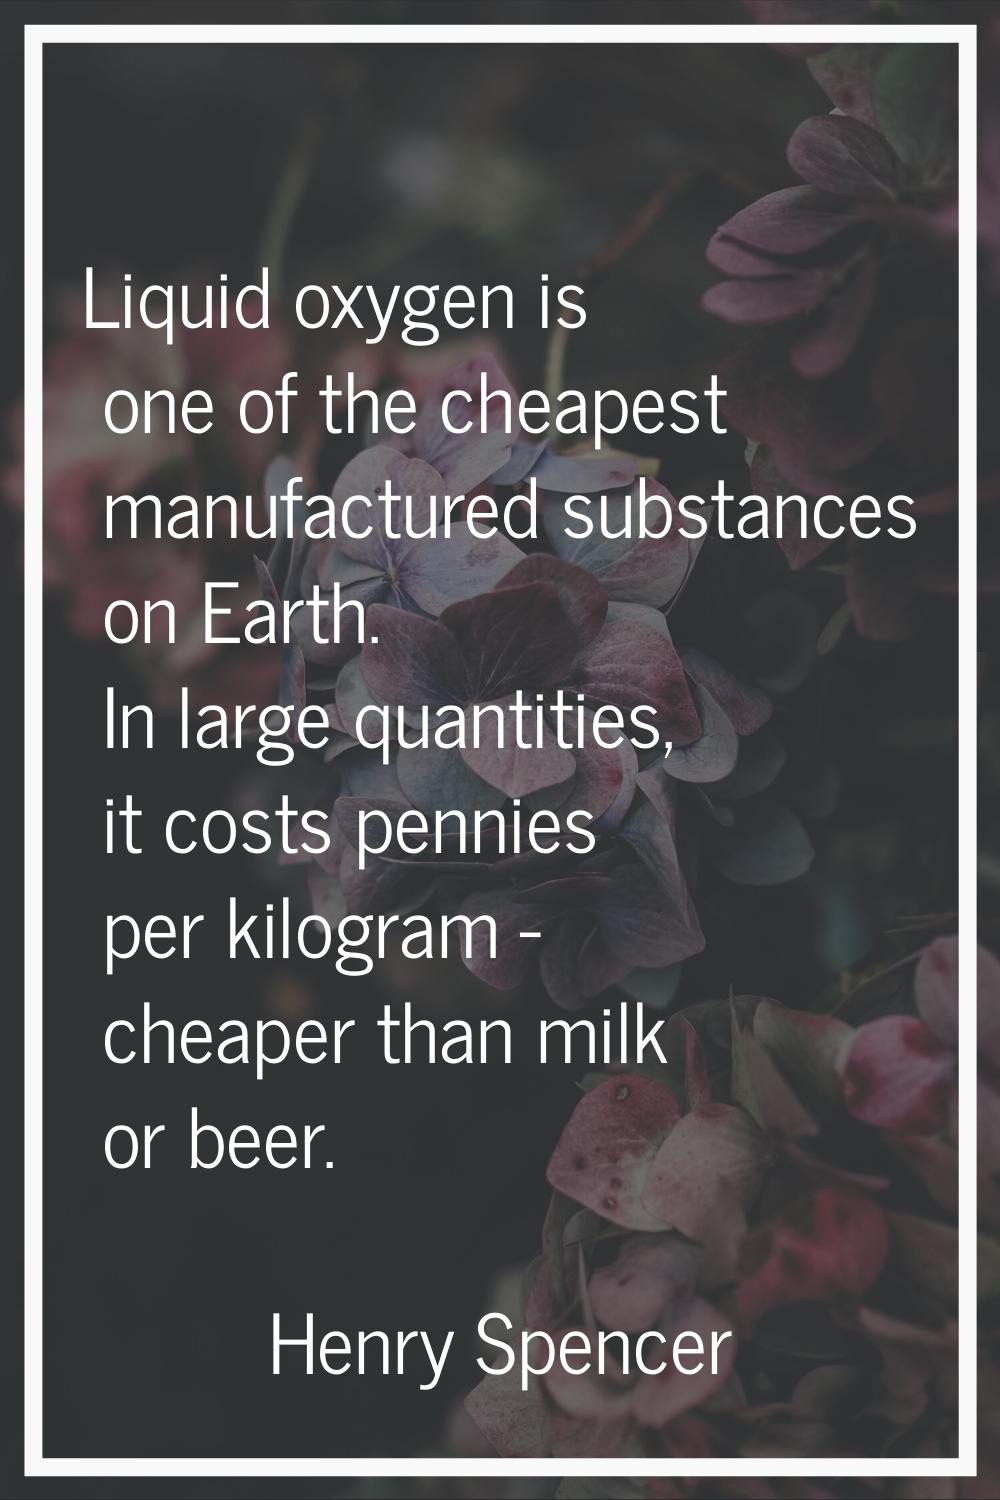 Liquid oxygen is one of the cheapest manufactured substances on Earth. In large quantities, it cost